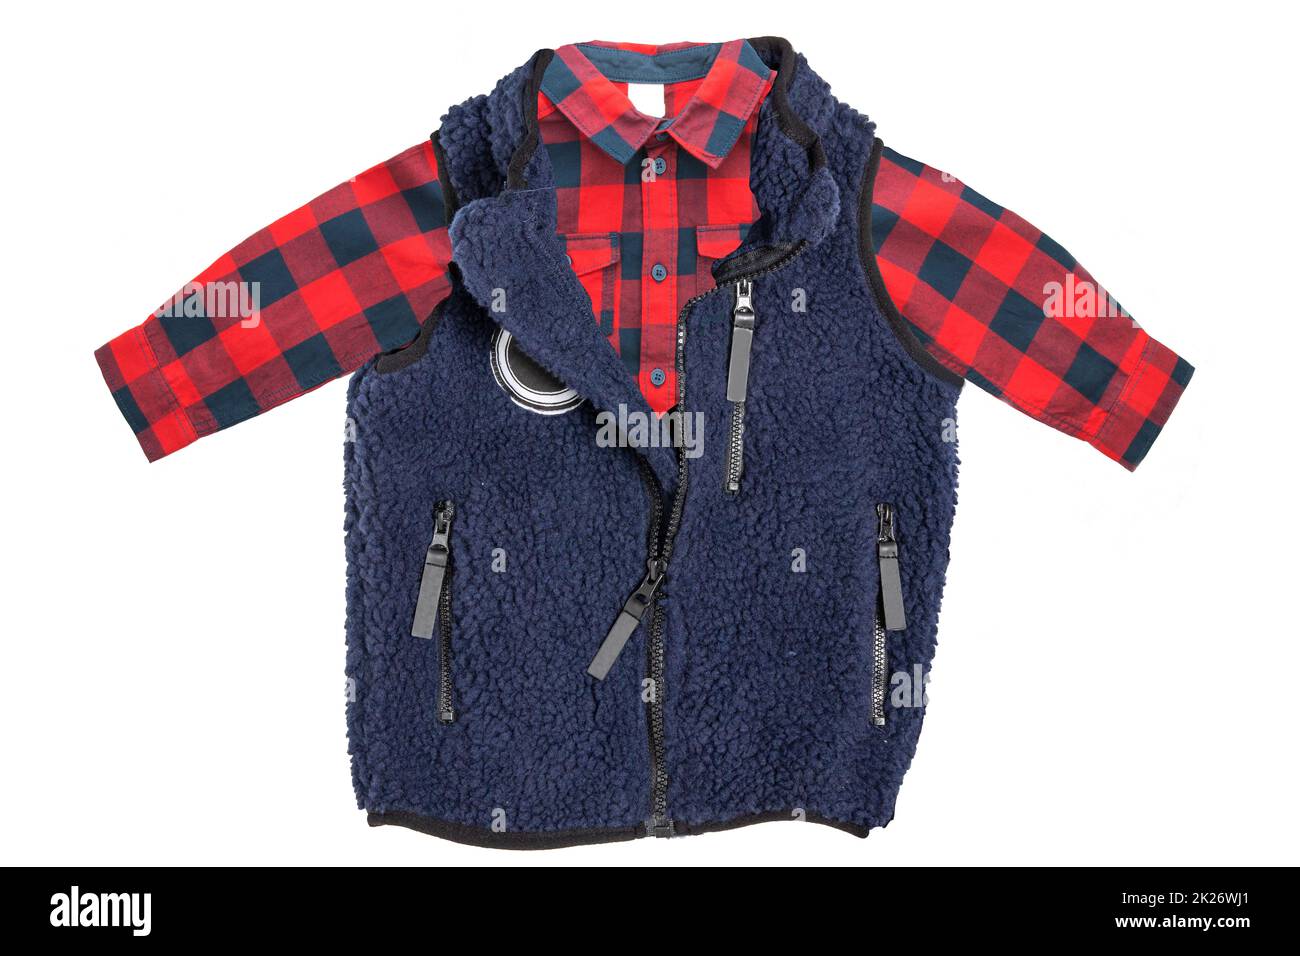 Fur vest. A blue fur vest with blue wool lining fabric and a red checkered shirt for the little boy isolated on a white background. Child spring and autumn fashion. Stock Photo